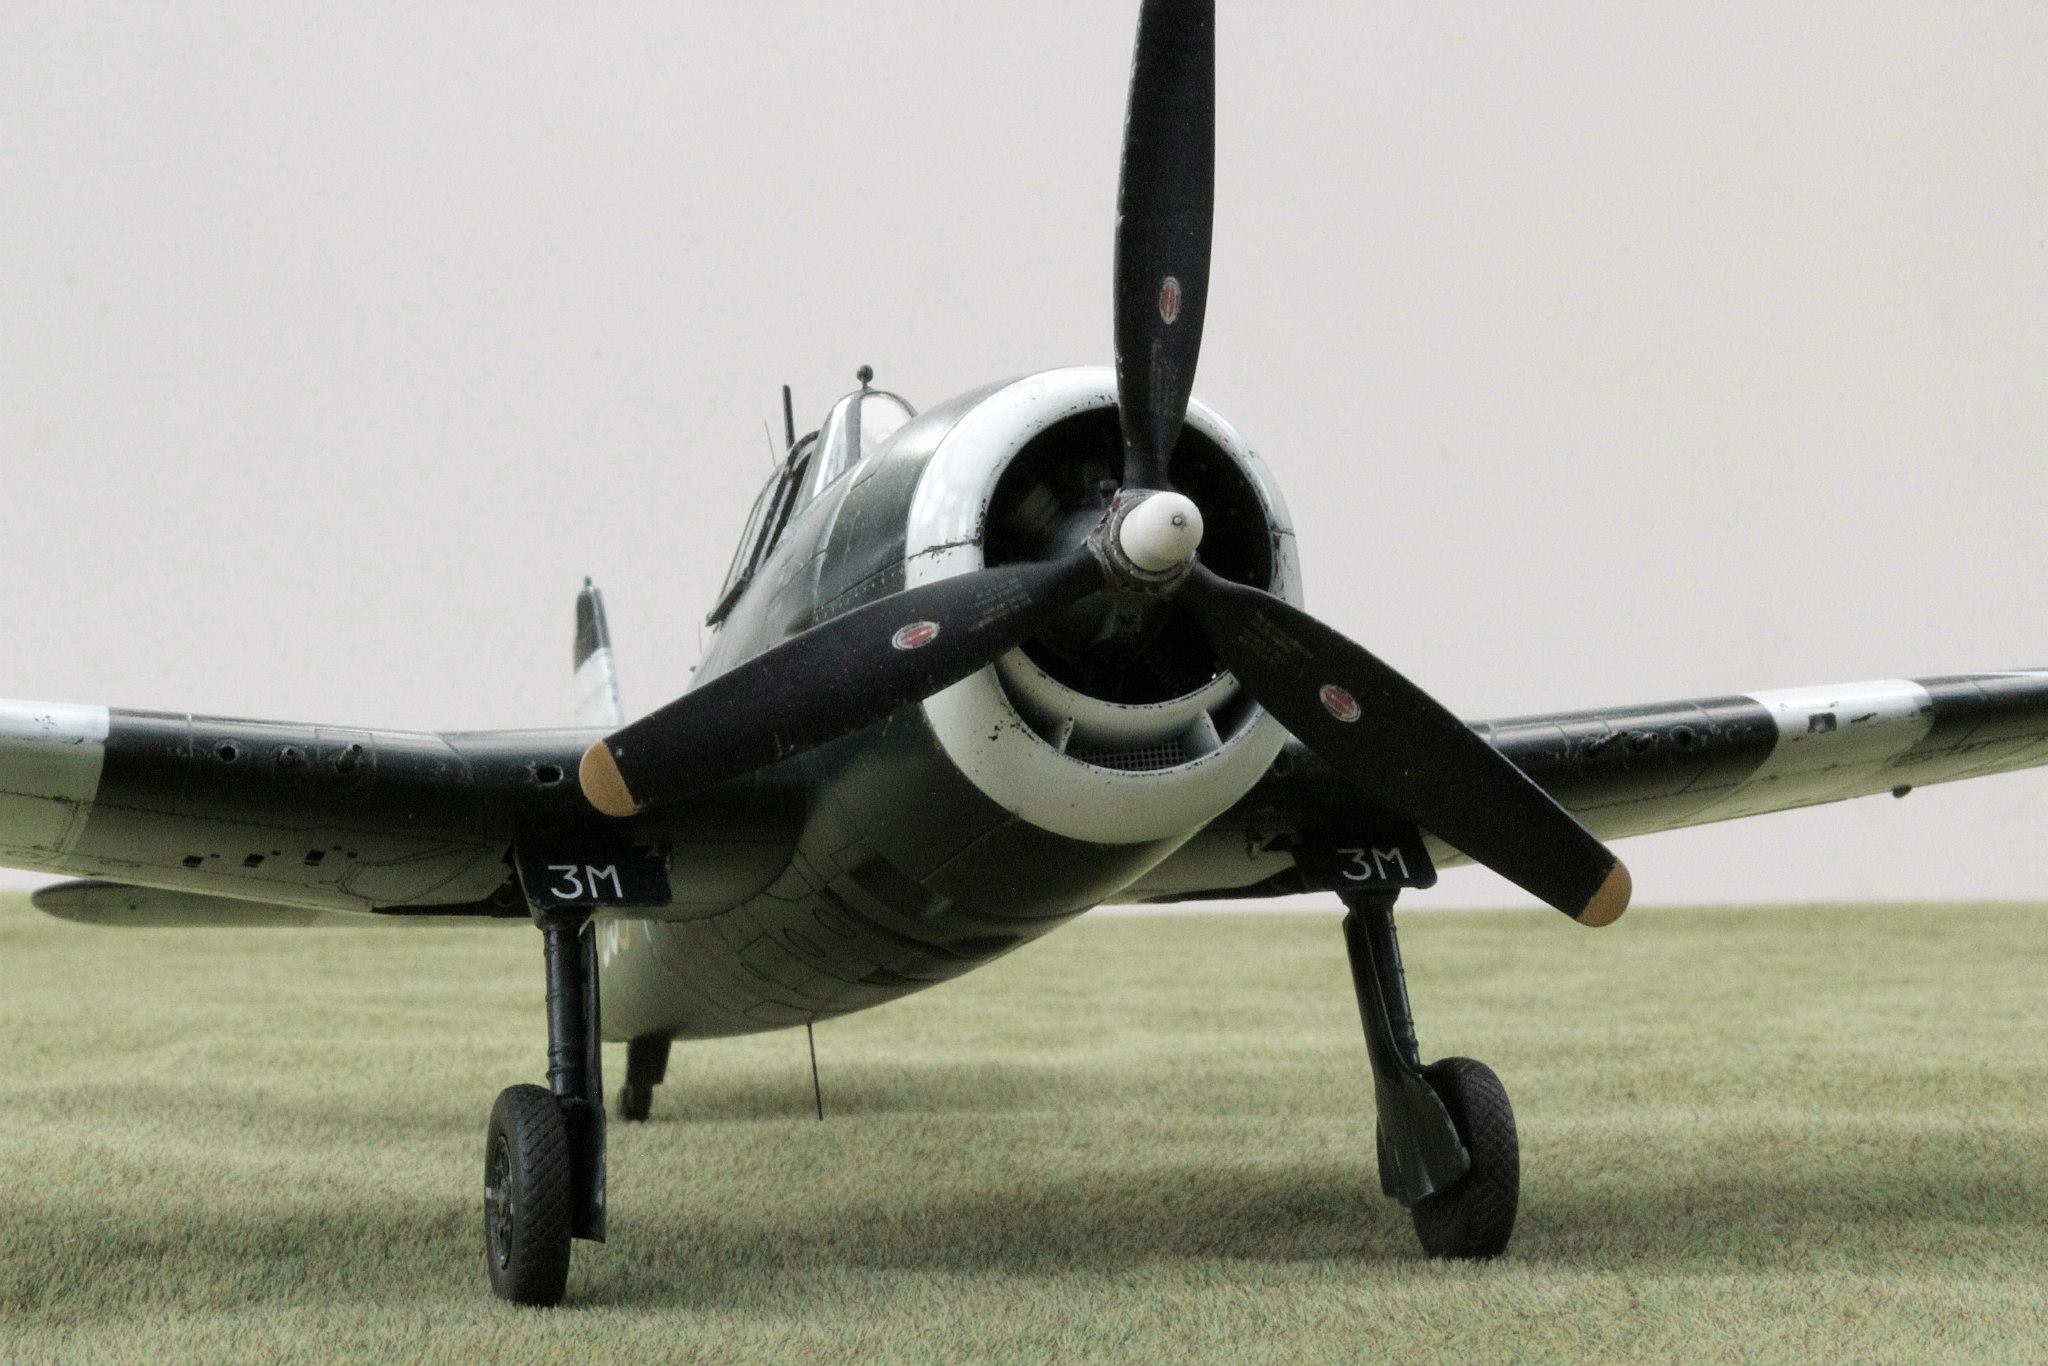 Grumman Hellcat Mk II JZ931 'C3-M' of 800 squadron, SEAC, at Trincomalee in October 1945. Kit is in 1/48th scale by Eduard.